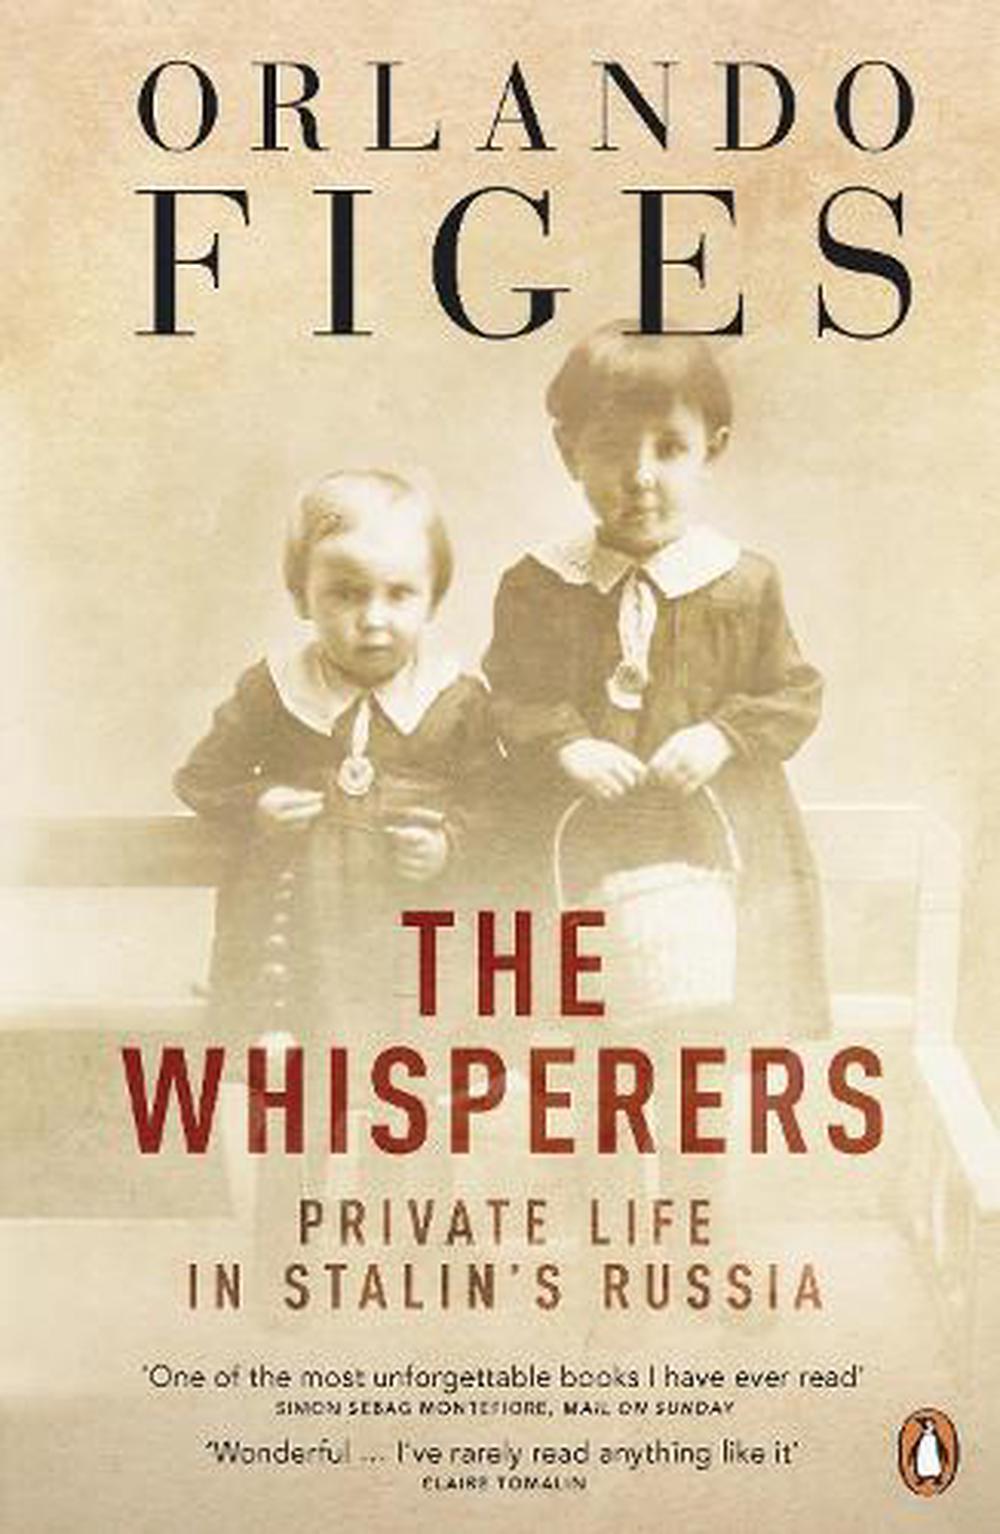 The Whisperers Private Life In Stalins Russia By Orlando Figes